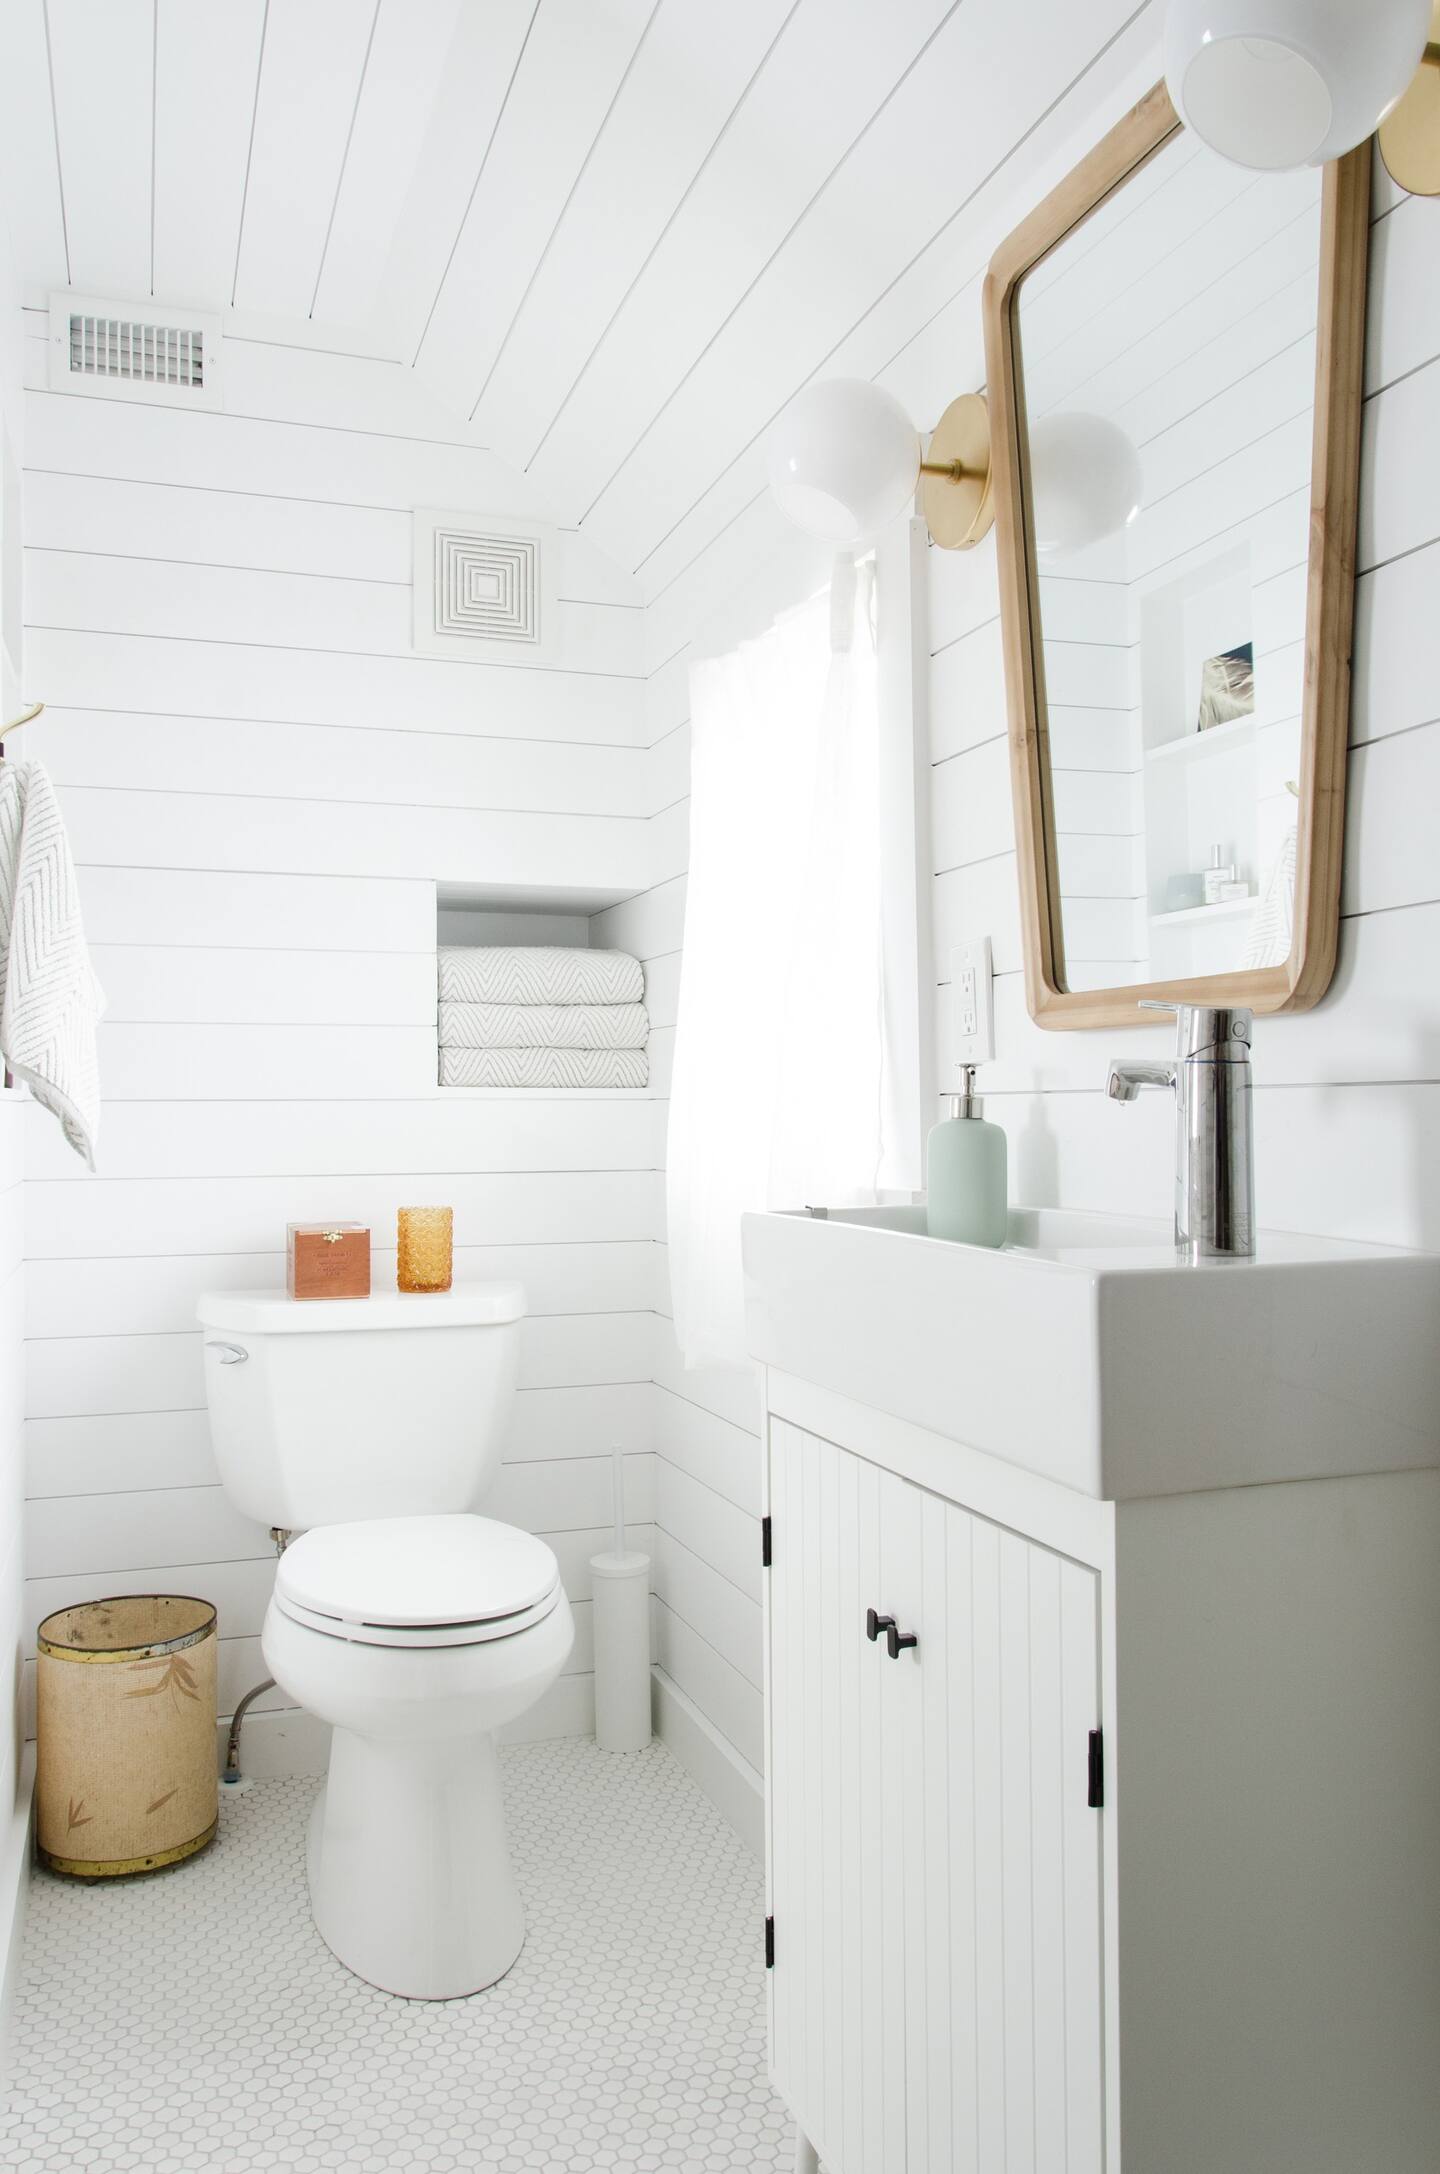 Pearl white bathroom with details made of wood